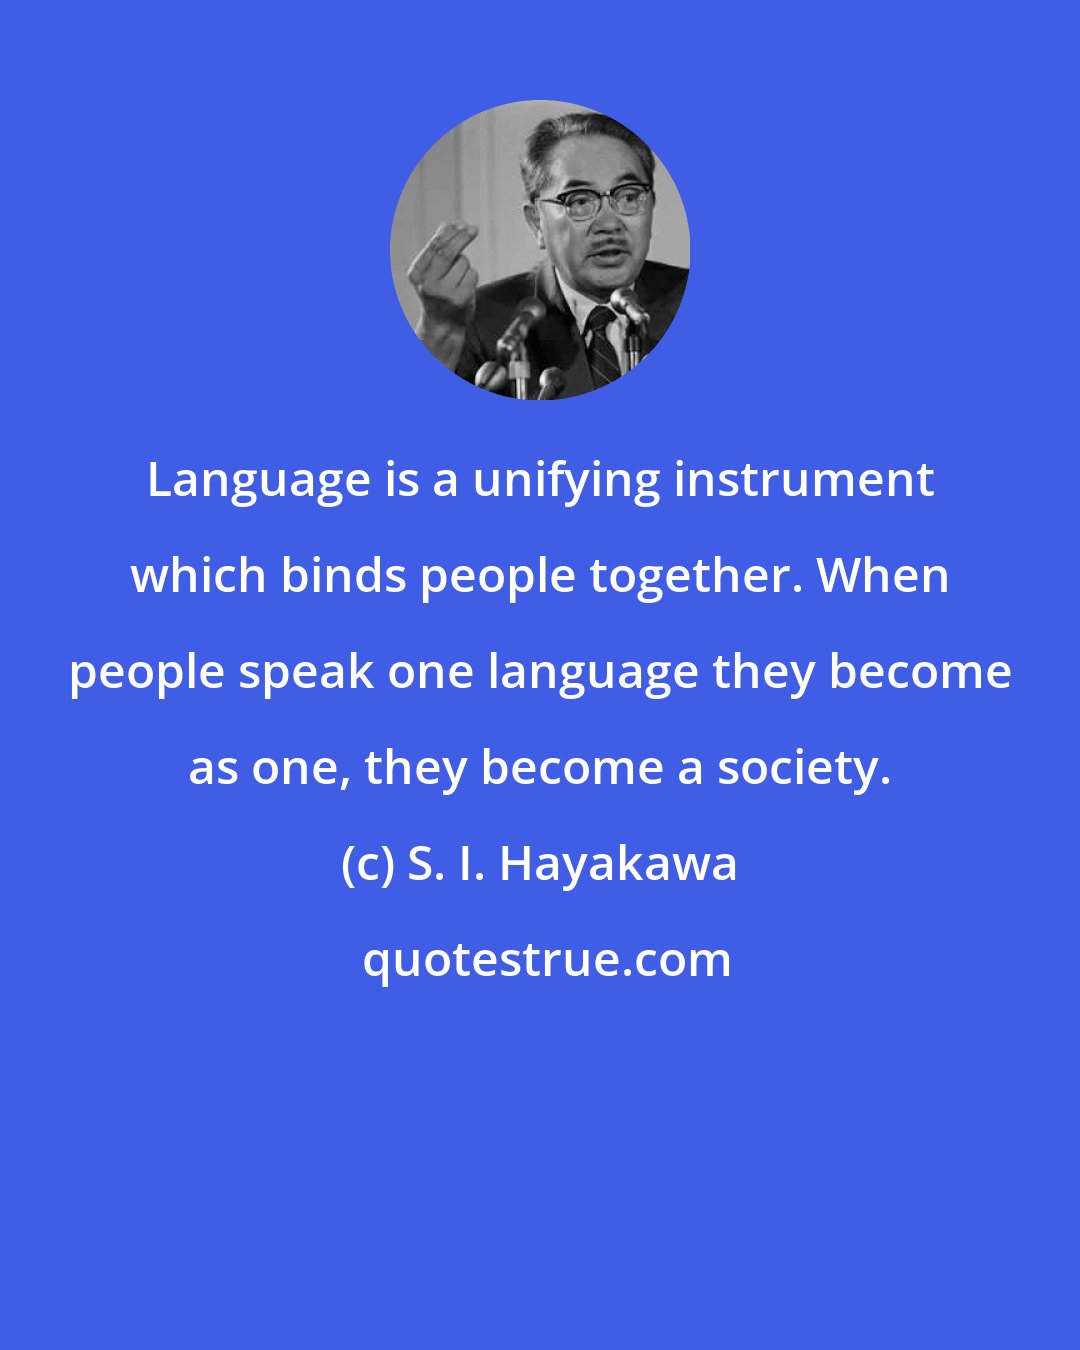 S. I. Hayakawa: Language is a unifying instrument which binds people together. When people speak one language they become as one, they become a society.